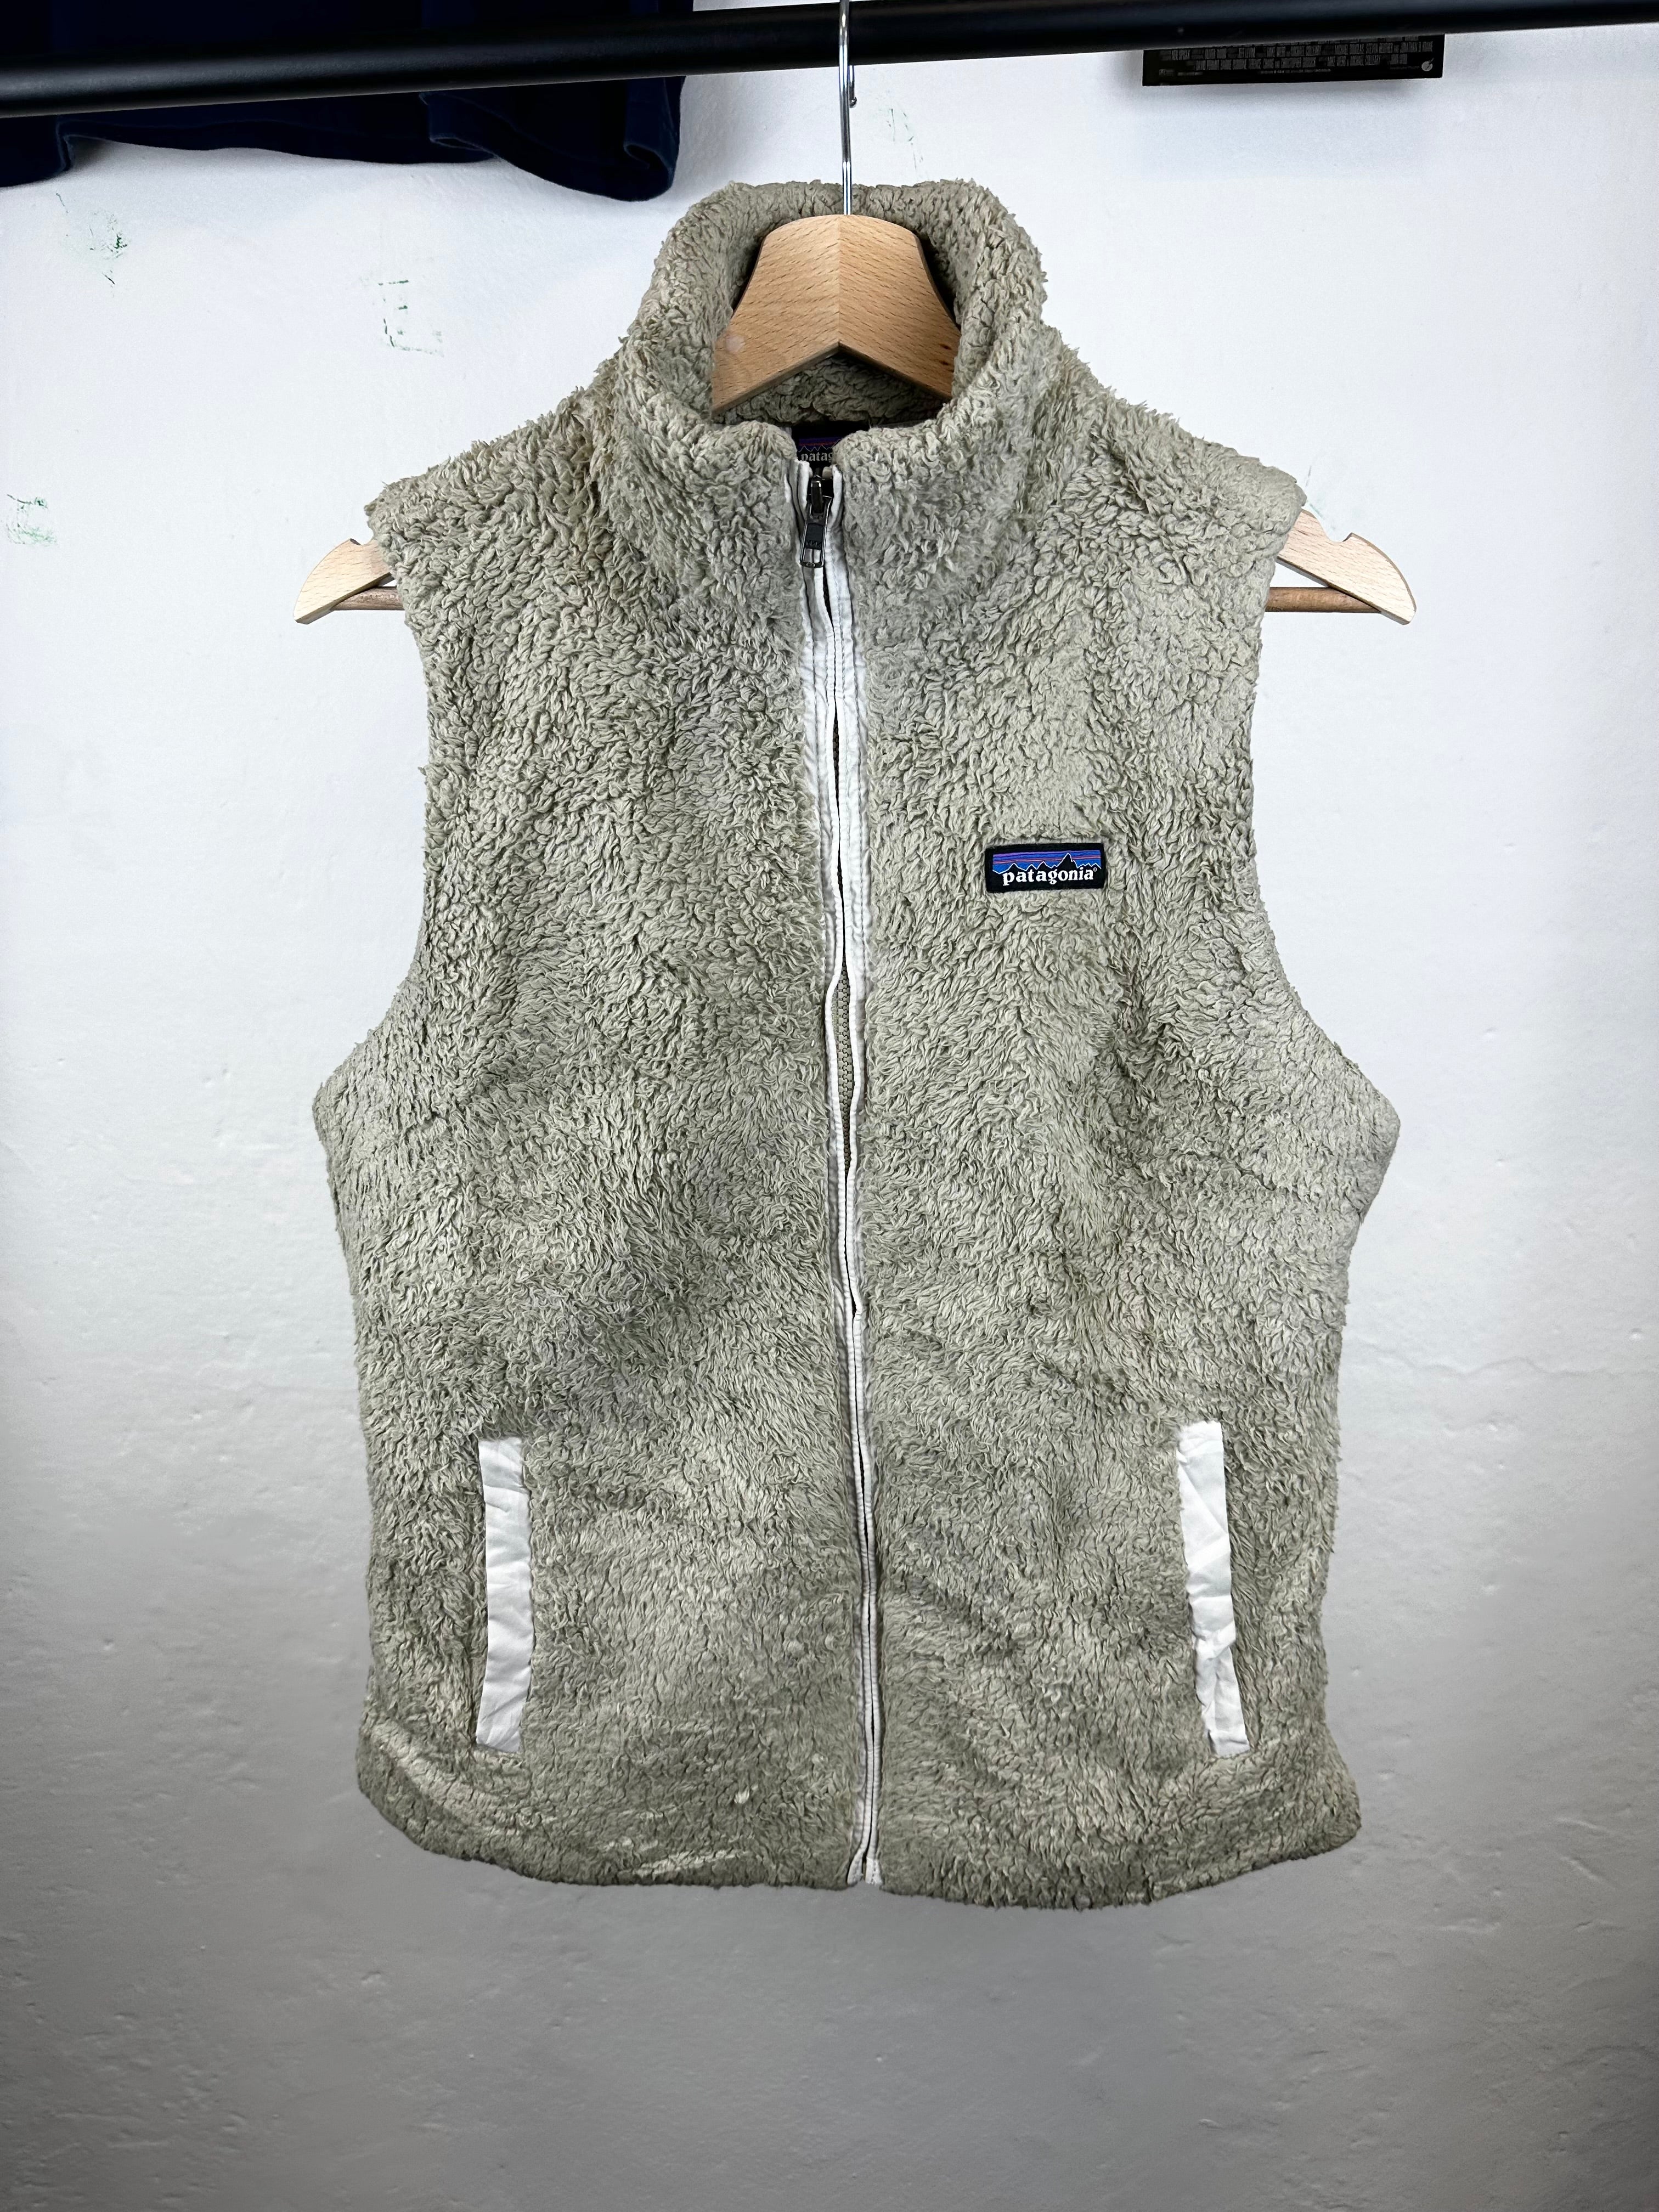 Patagonia Fluffy Vest - size M